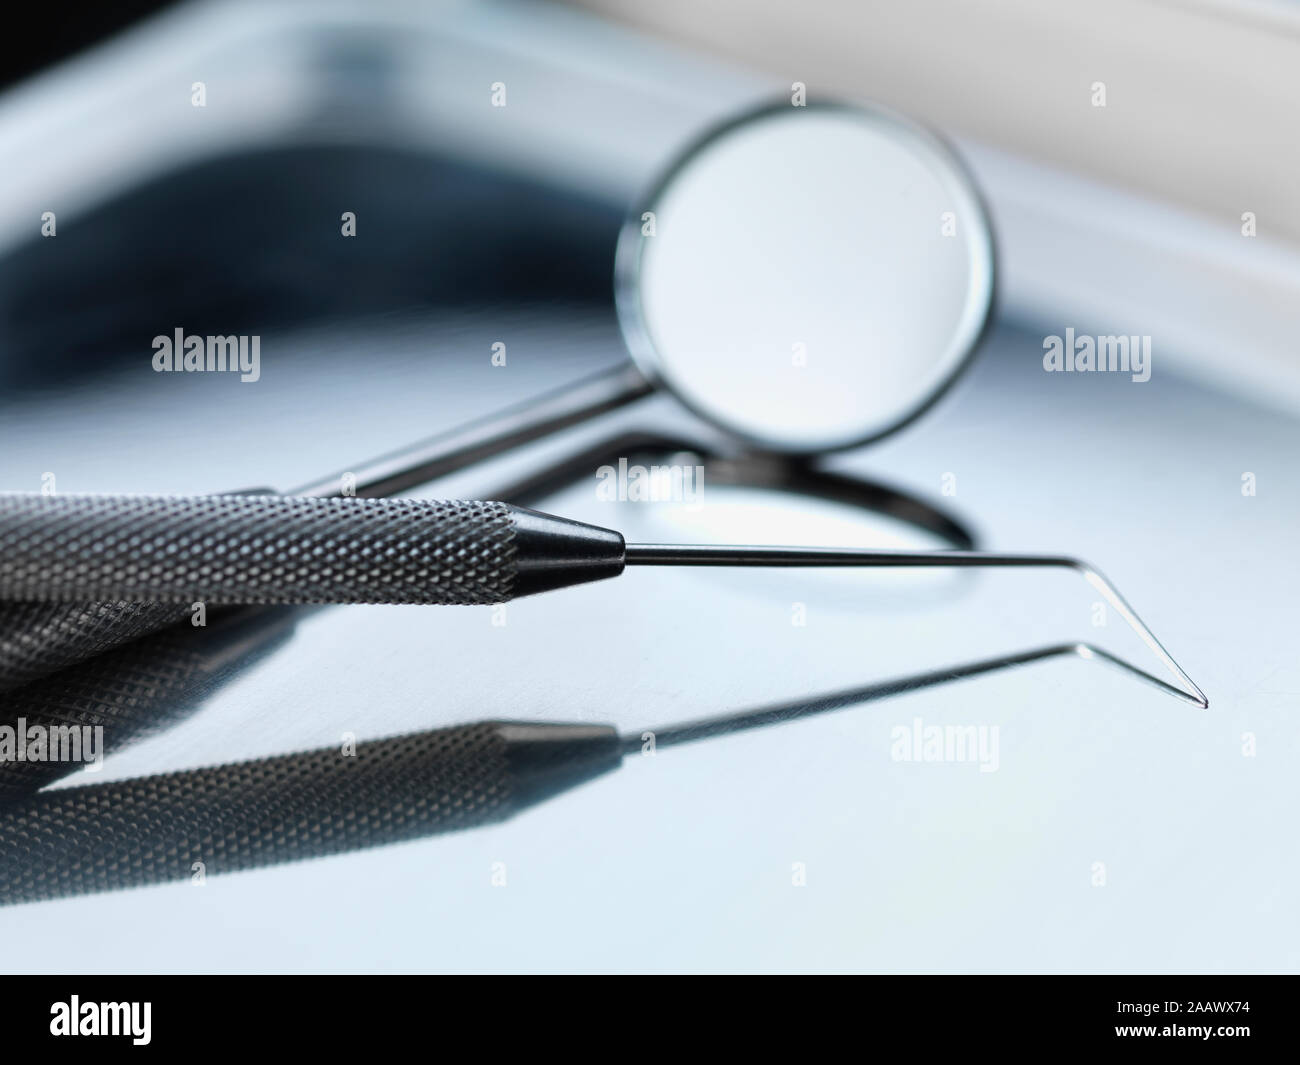 Close-up of periodontal probe with angled mirror in tray at hospital Stock Photo